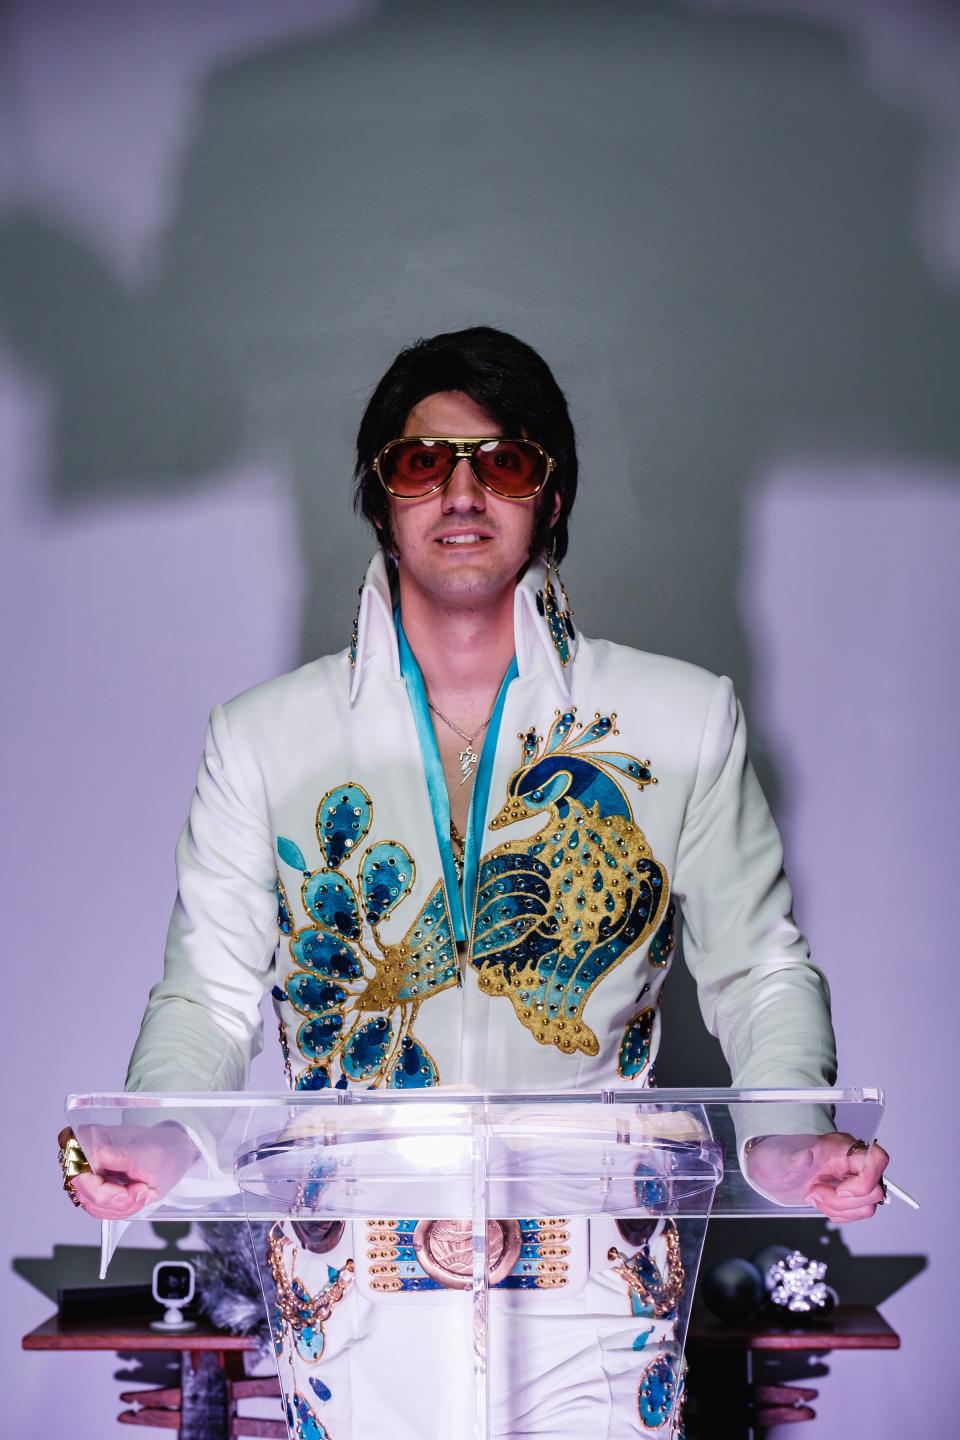 Michael Brindley, pastor of Organic Church in Uhrichsville, poses in an exact replica of the peacock jumpsuit worn by Elvis Presley. He puts on Elvis shows, and from time to time interjects faith teachings into those shows.